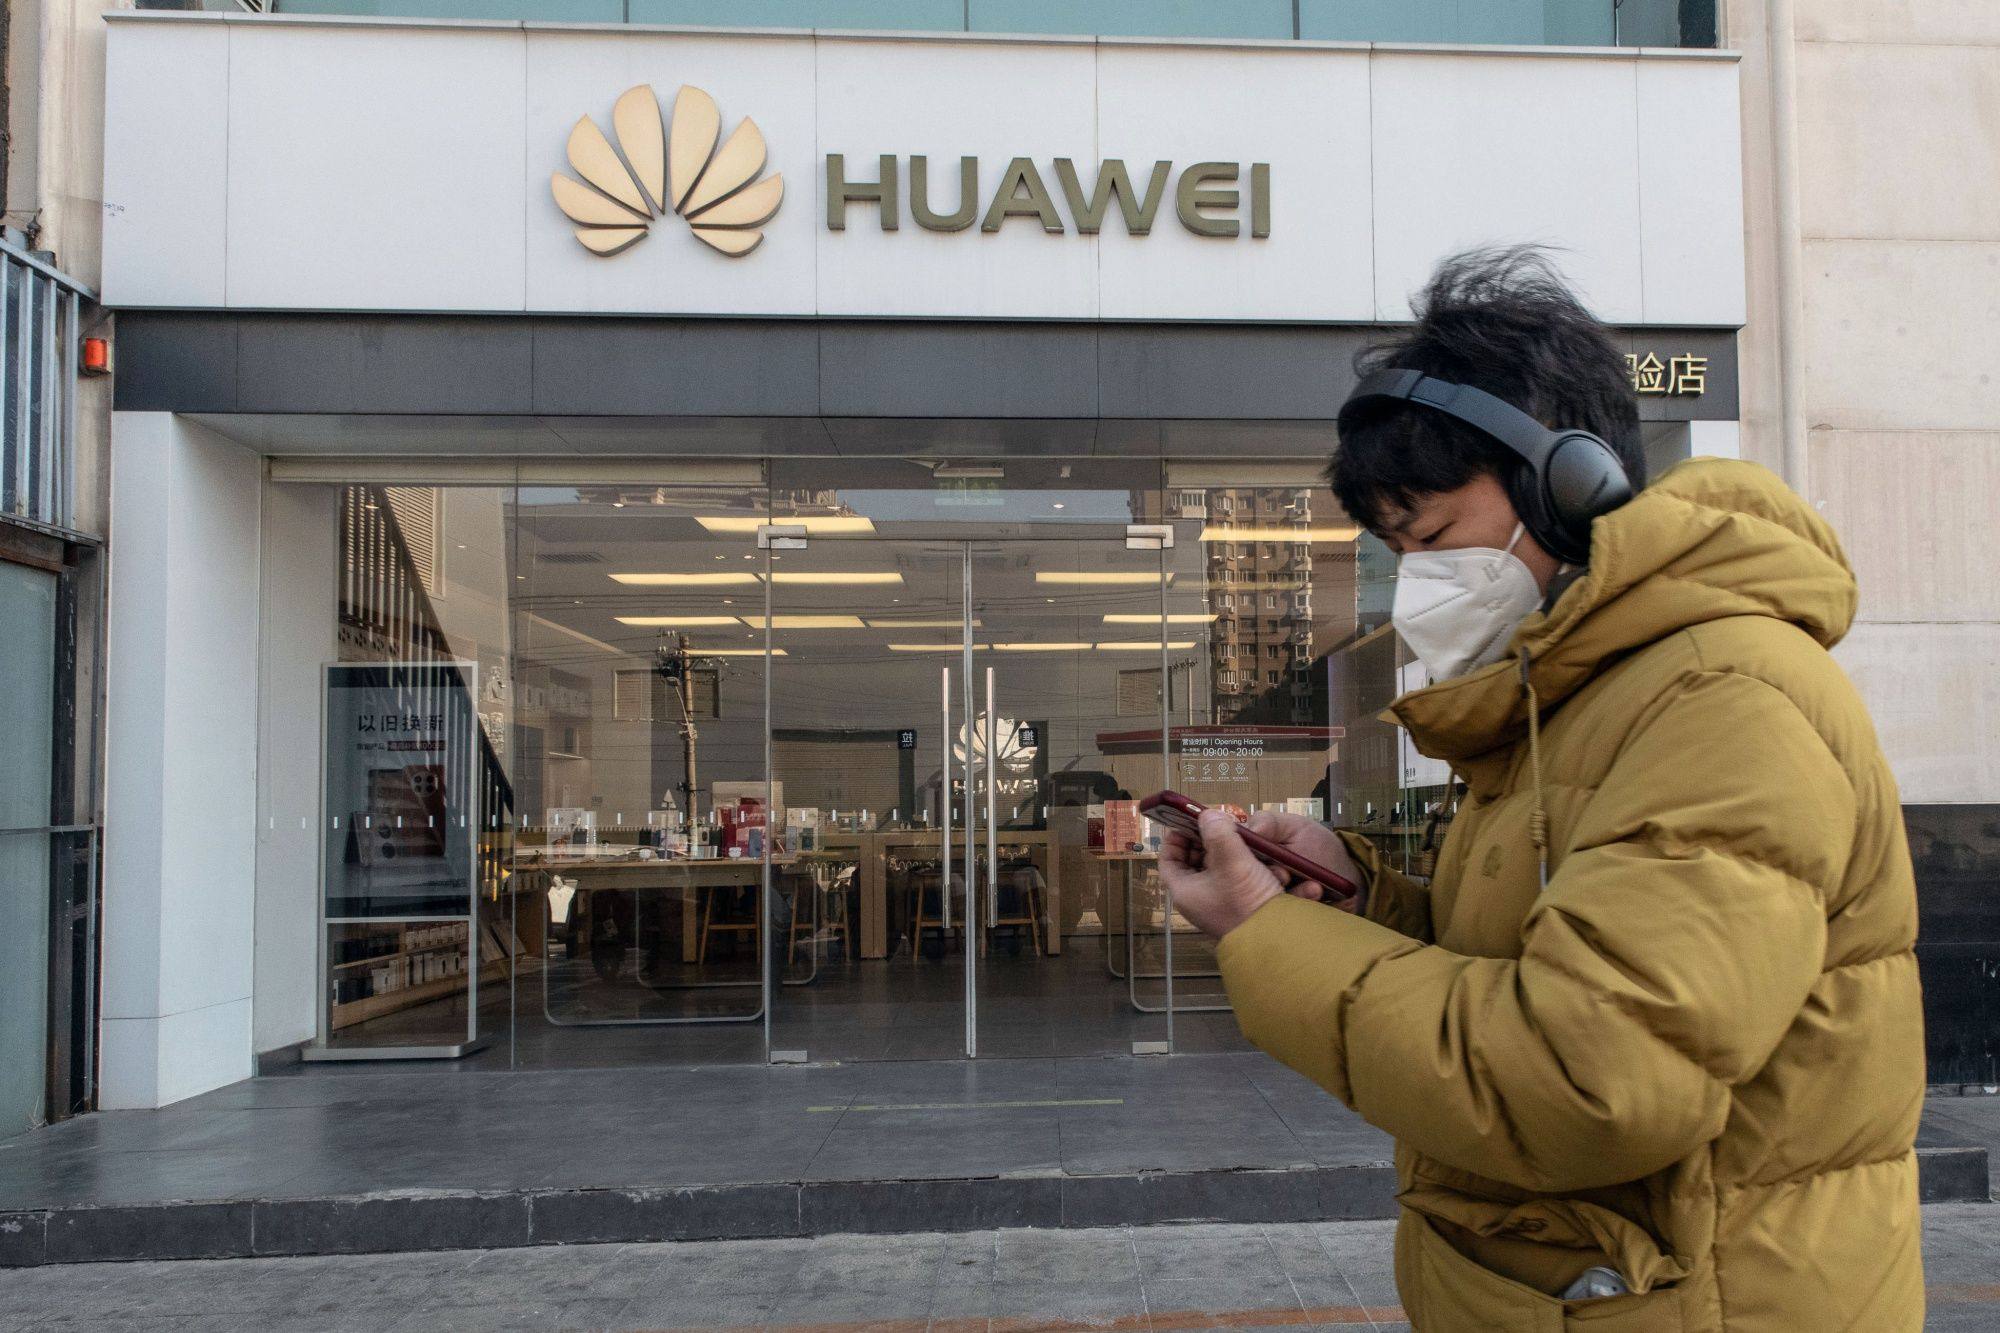 A Huawei Technologies store in Beijing on January 31, 2023. Huawei has expressed opposition to Nokia’s effort to sell its majority stake in the joint venture TD Tech, which has previously sold rebranded smartphones with chips that Huawei is barred from buying itself. Source: Bloomberg